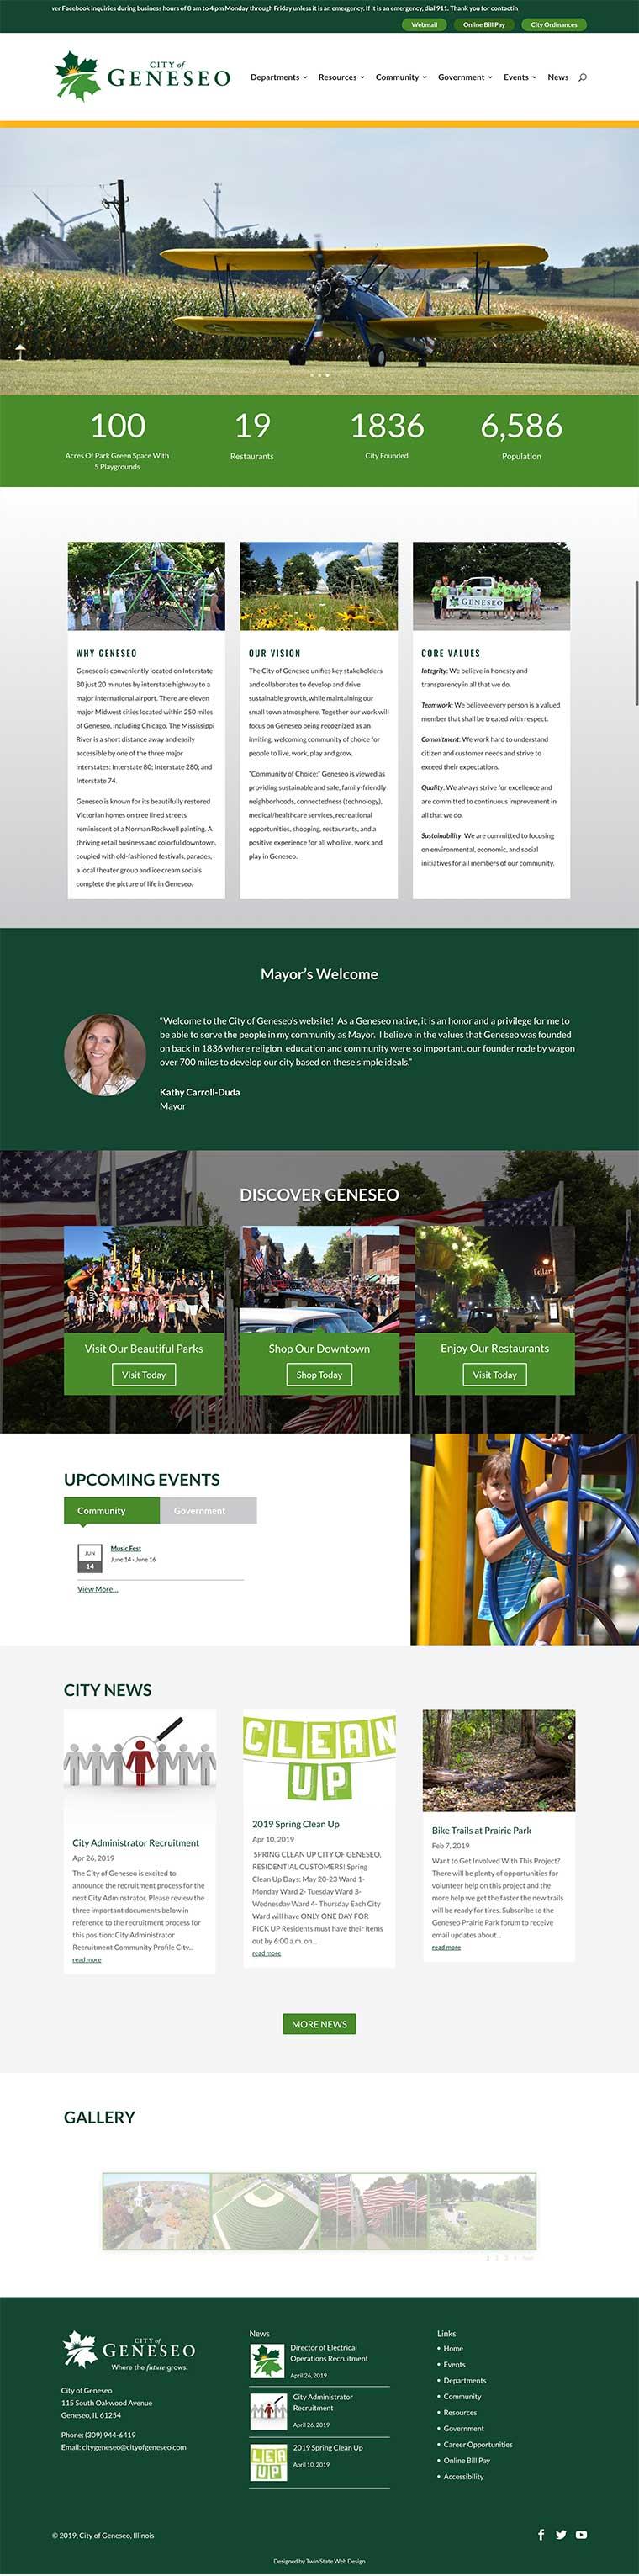 A screenshot of the city of Geneseo website.